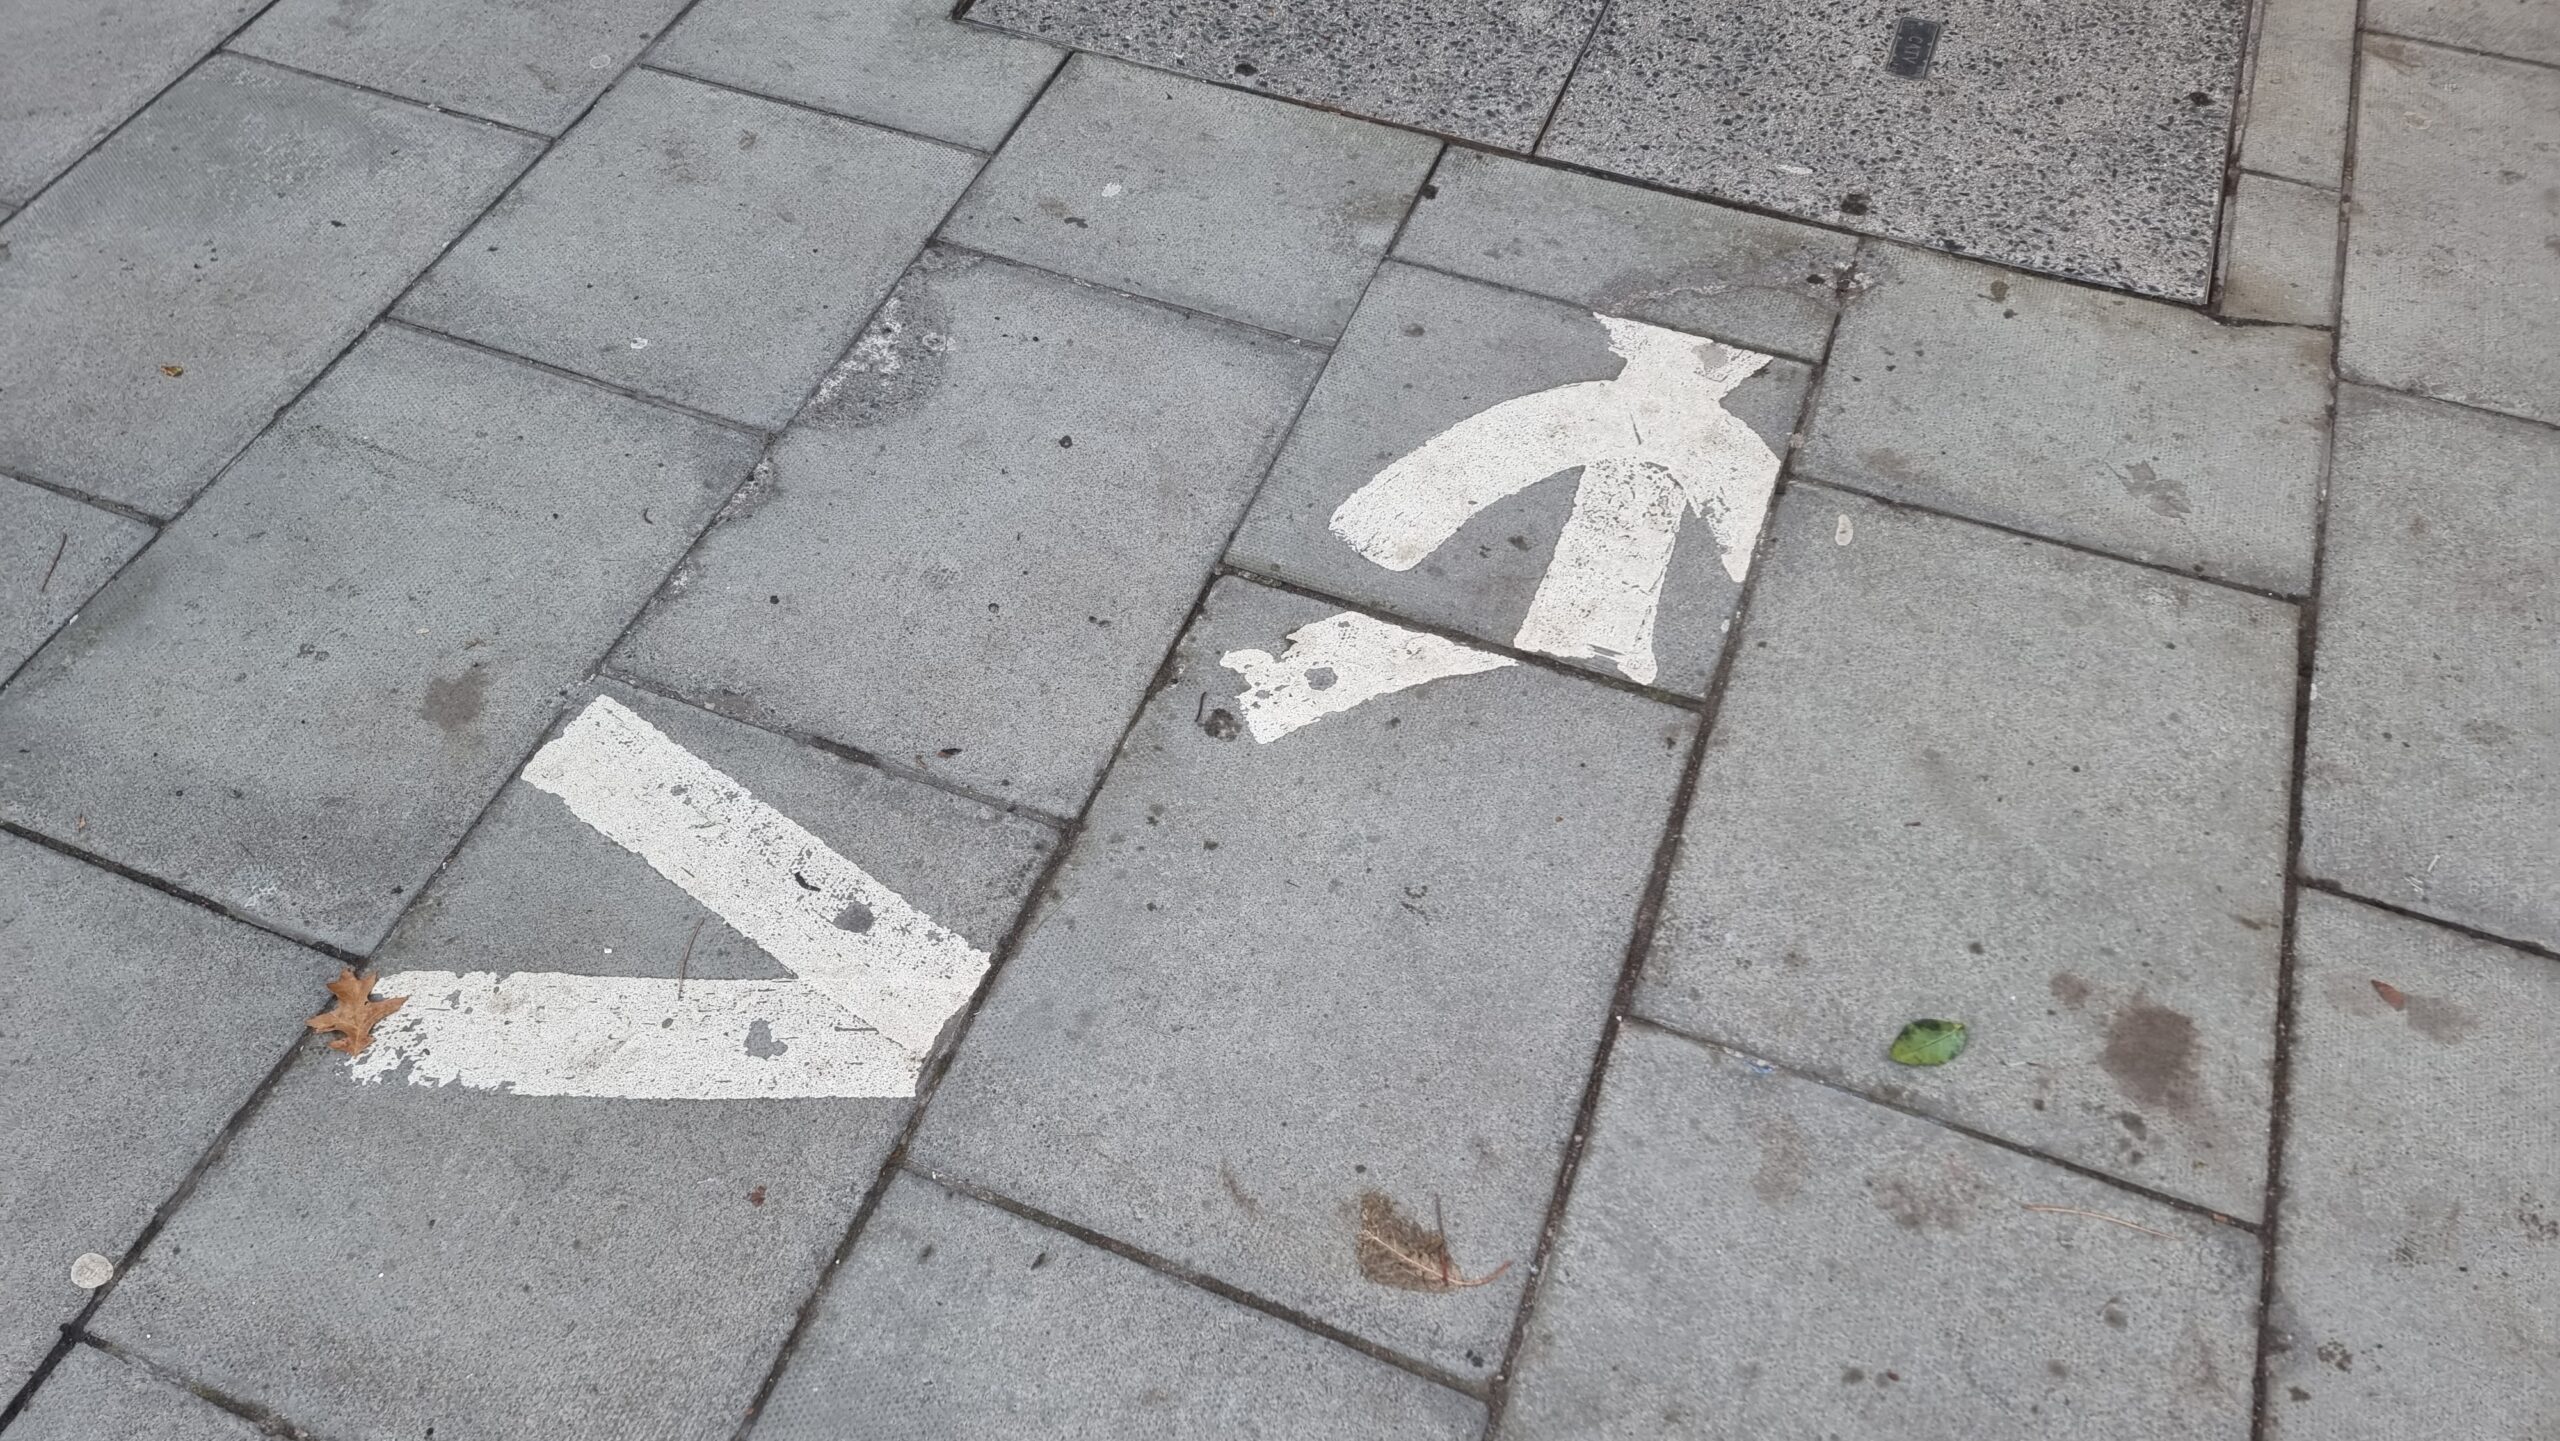 Photograph of paving slabs: a glyph of a walking person, signifying "walk here", has been painted onto the flagstones, but the stones have since been lifted and replaced in slightly different locations, making the person appear "scrambled".